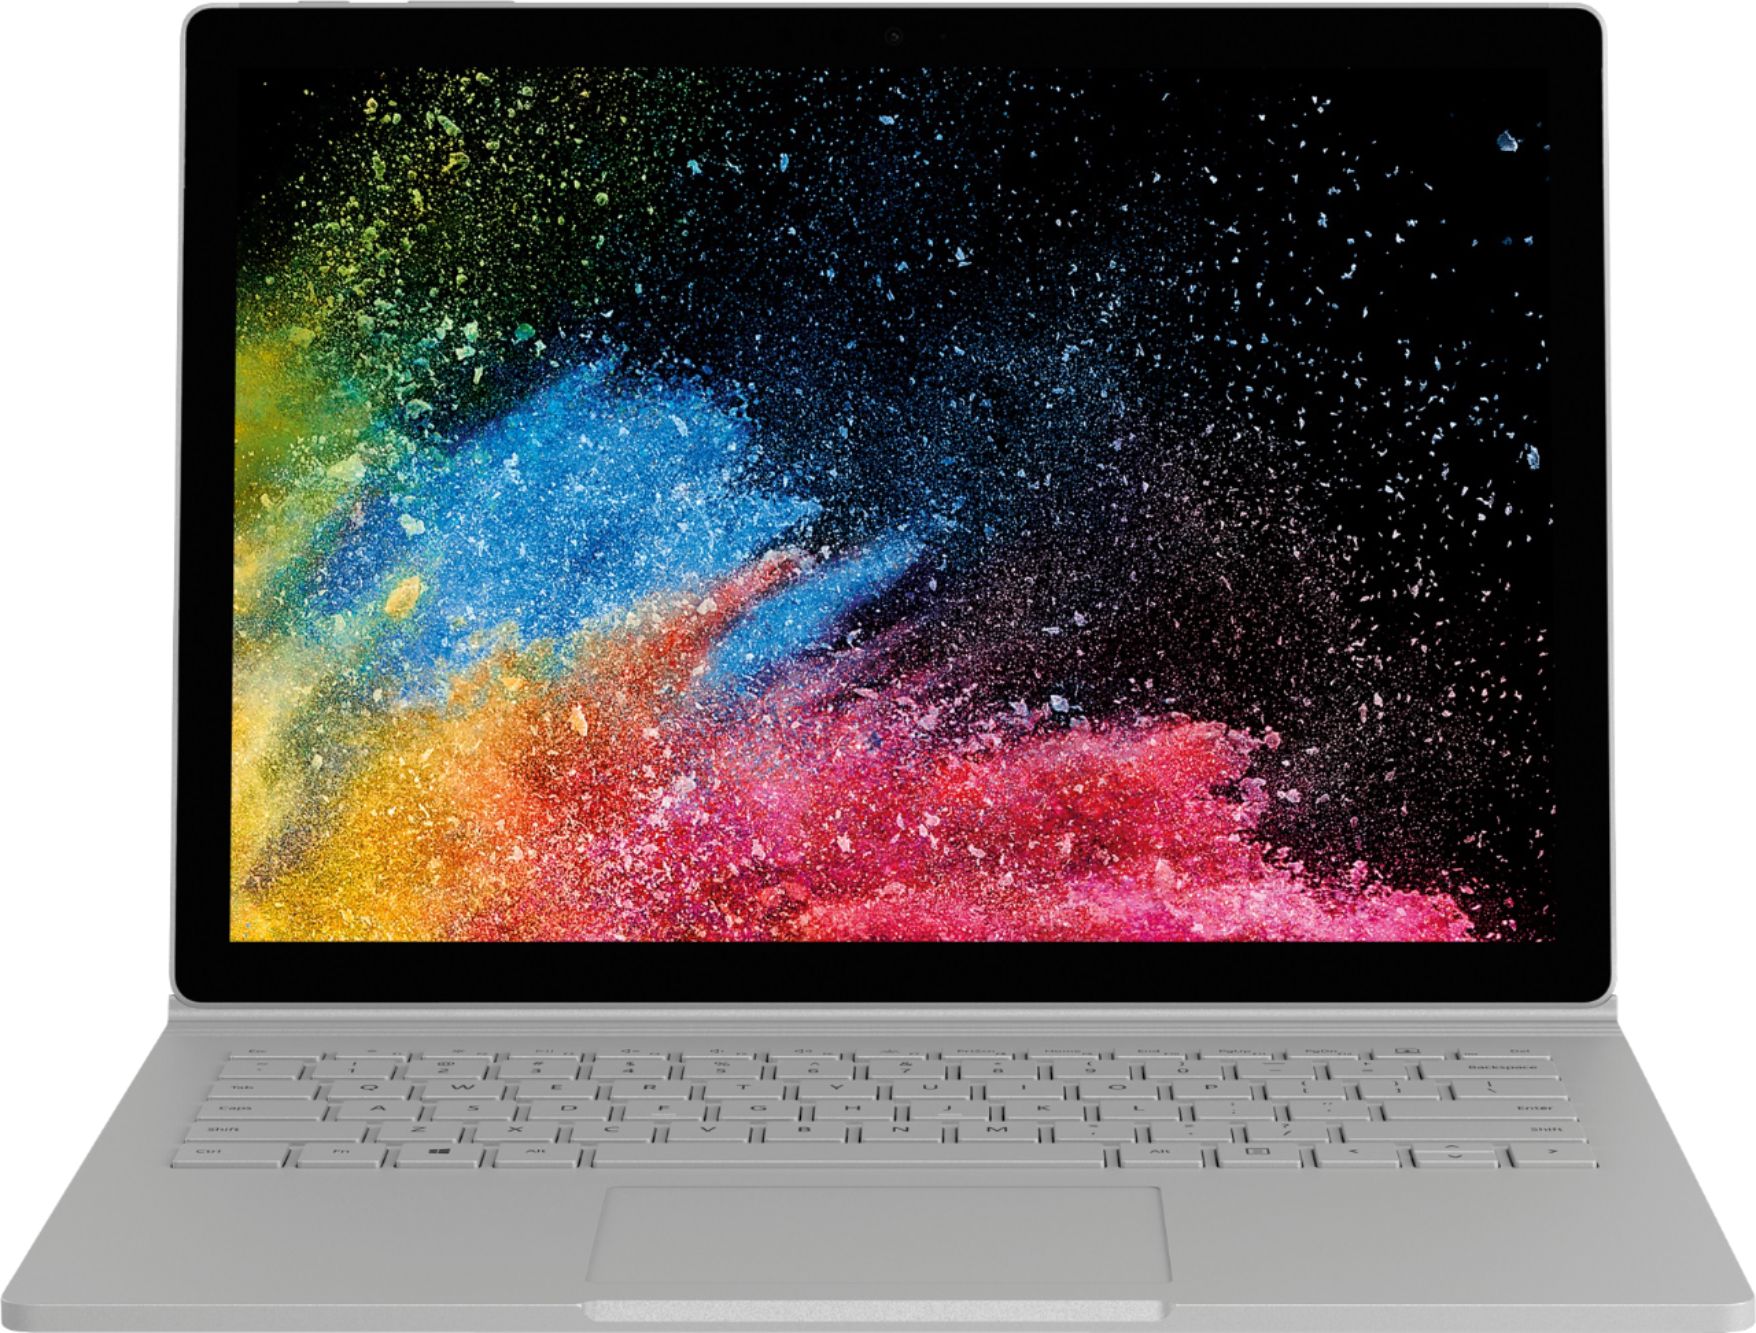 Angle View: Microsoft - Geek Squad Certified Refurbished Surface Book 2 - 13.5" Touch-Screen Laptop - Intel Core i7 - 8GB Memory - 256GB SSD - Platinum